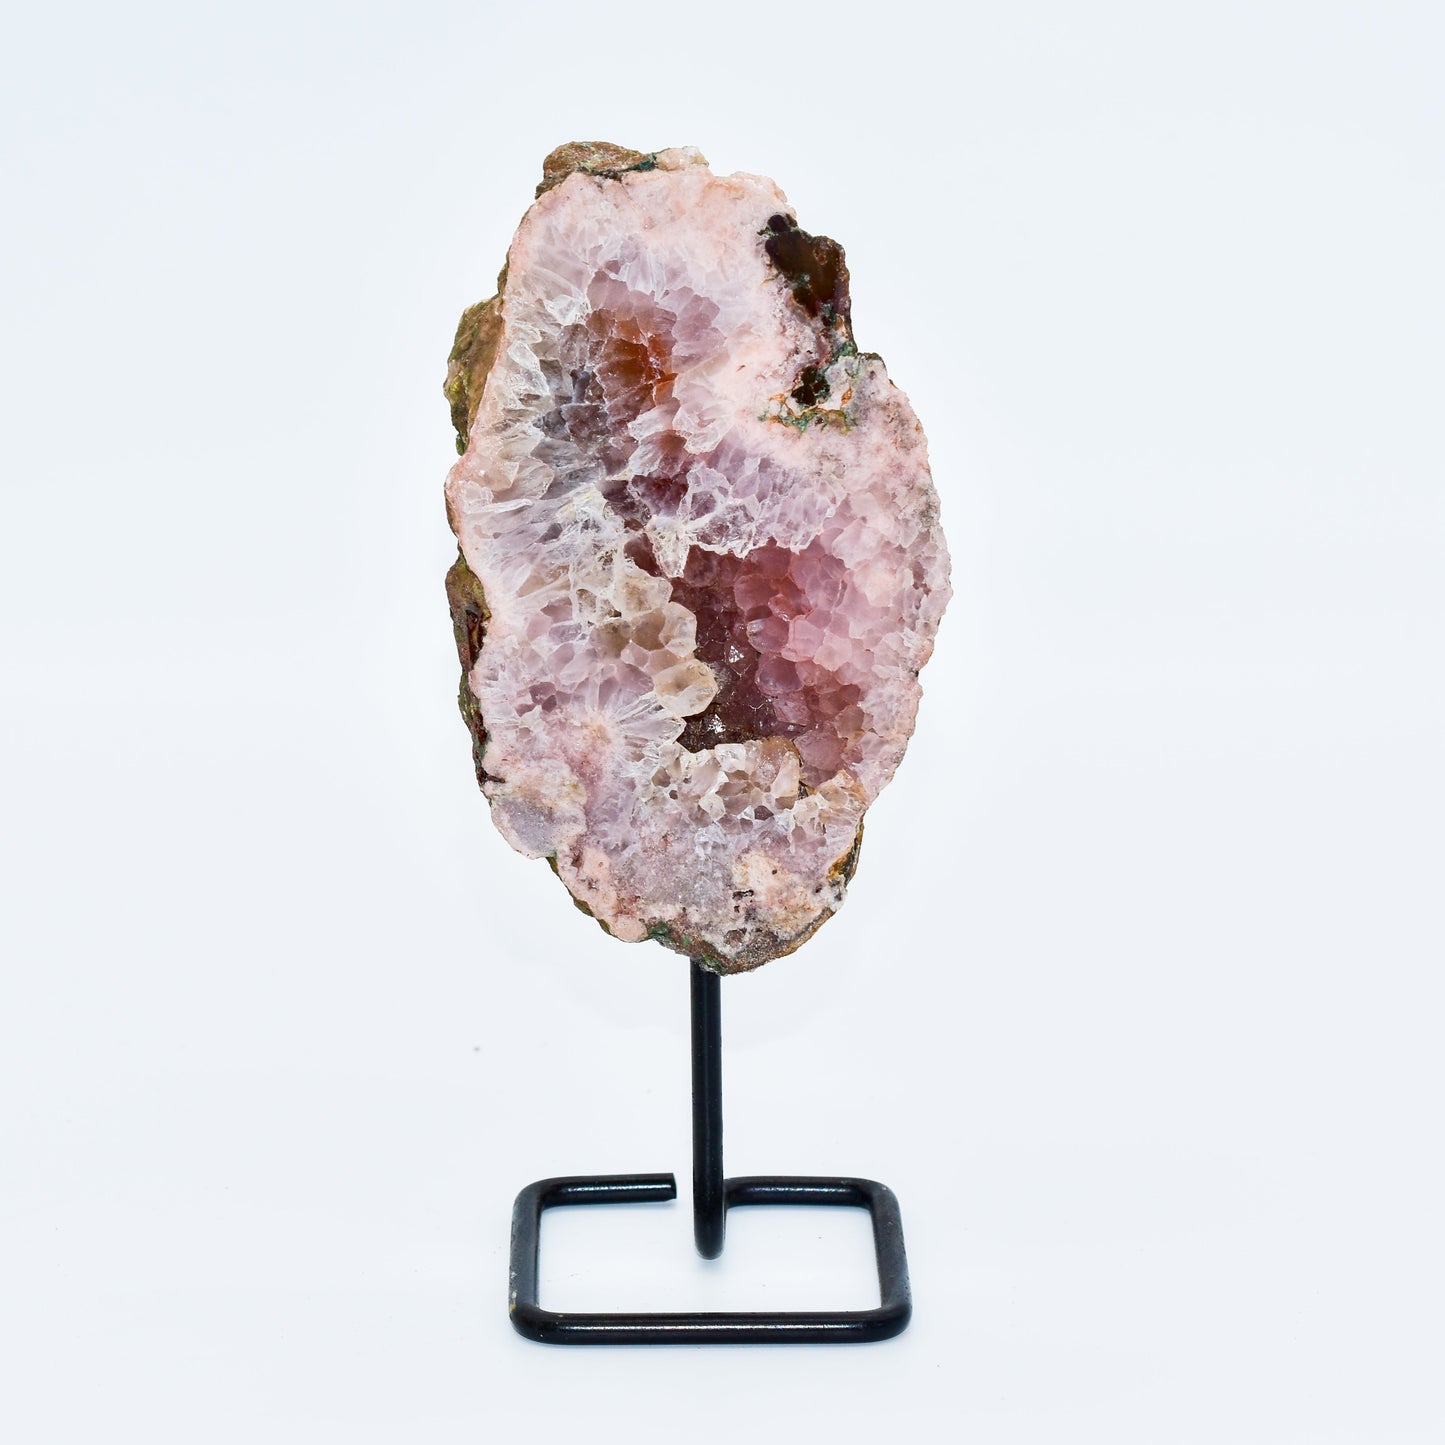 Small Pink Amethyst Slabs on Display Stands